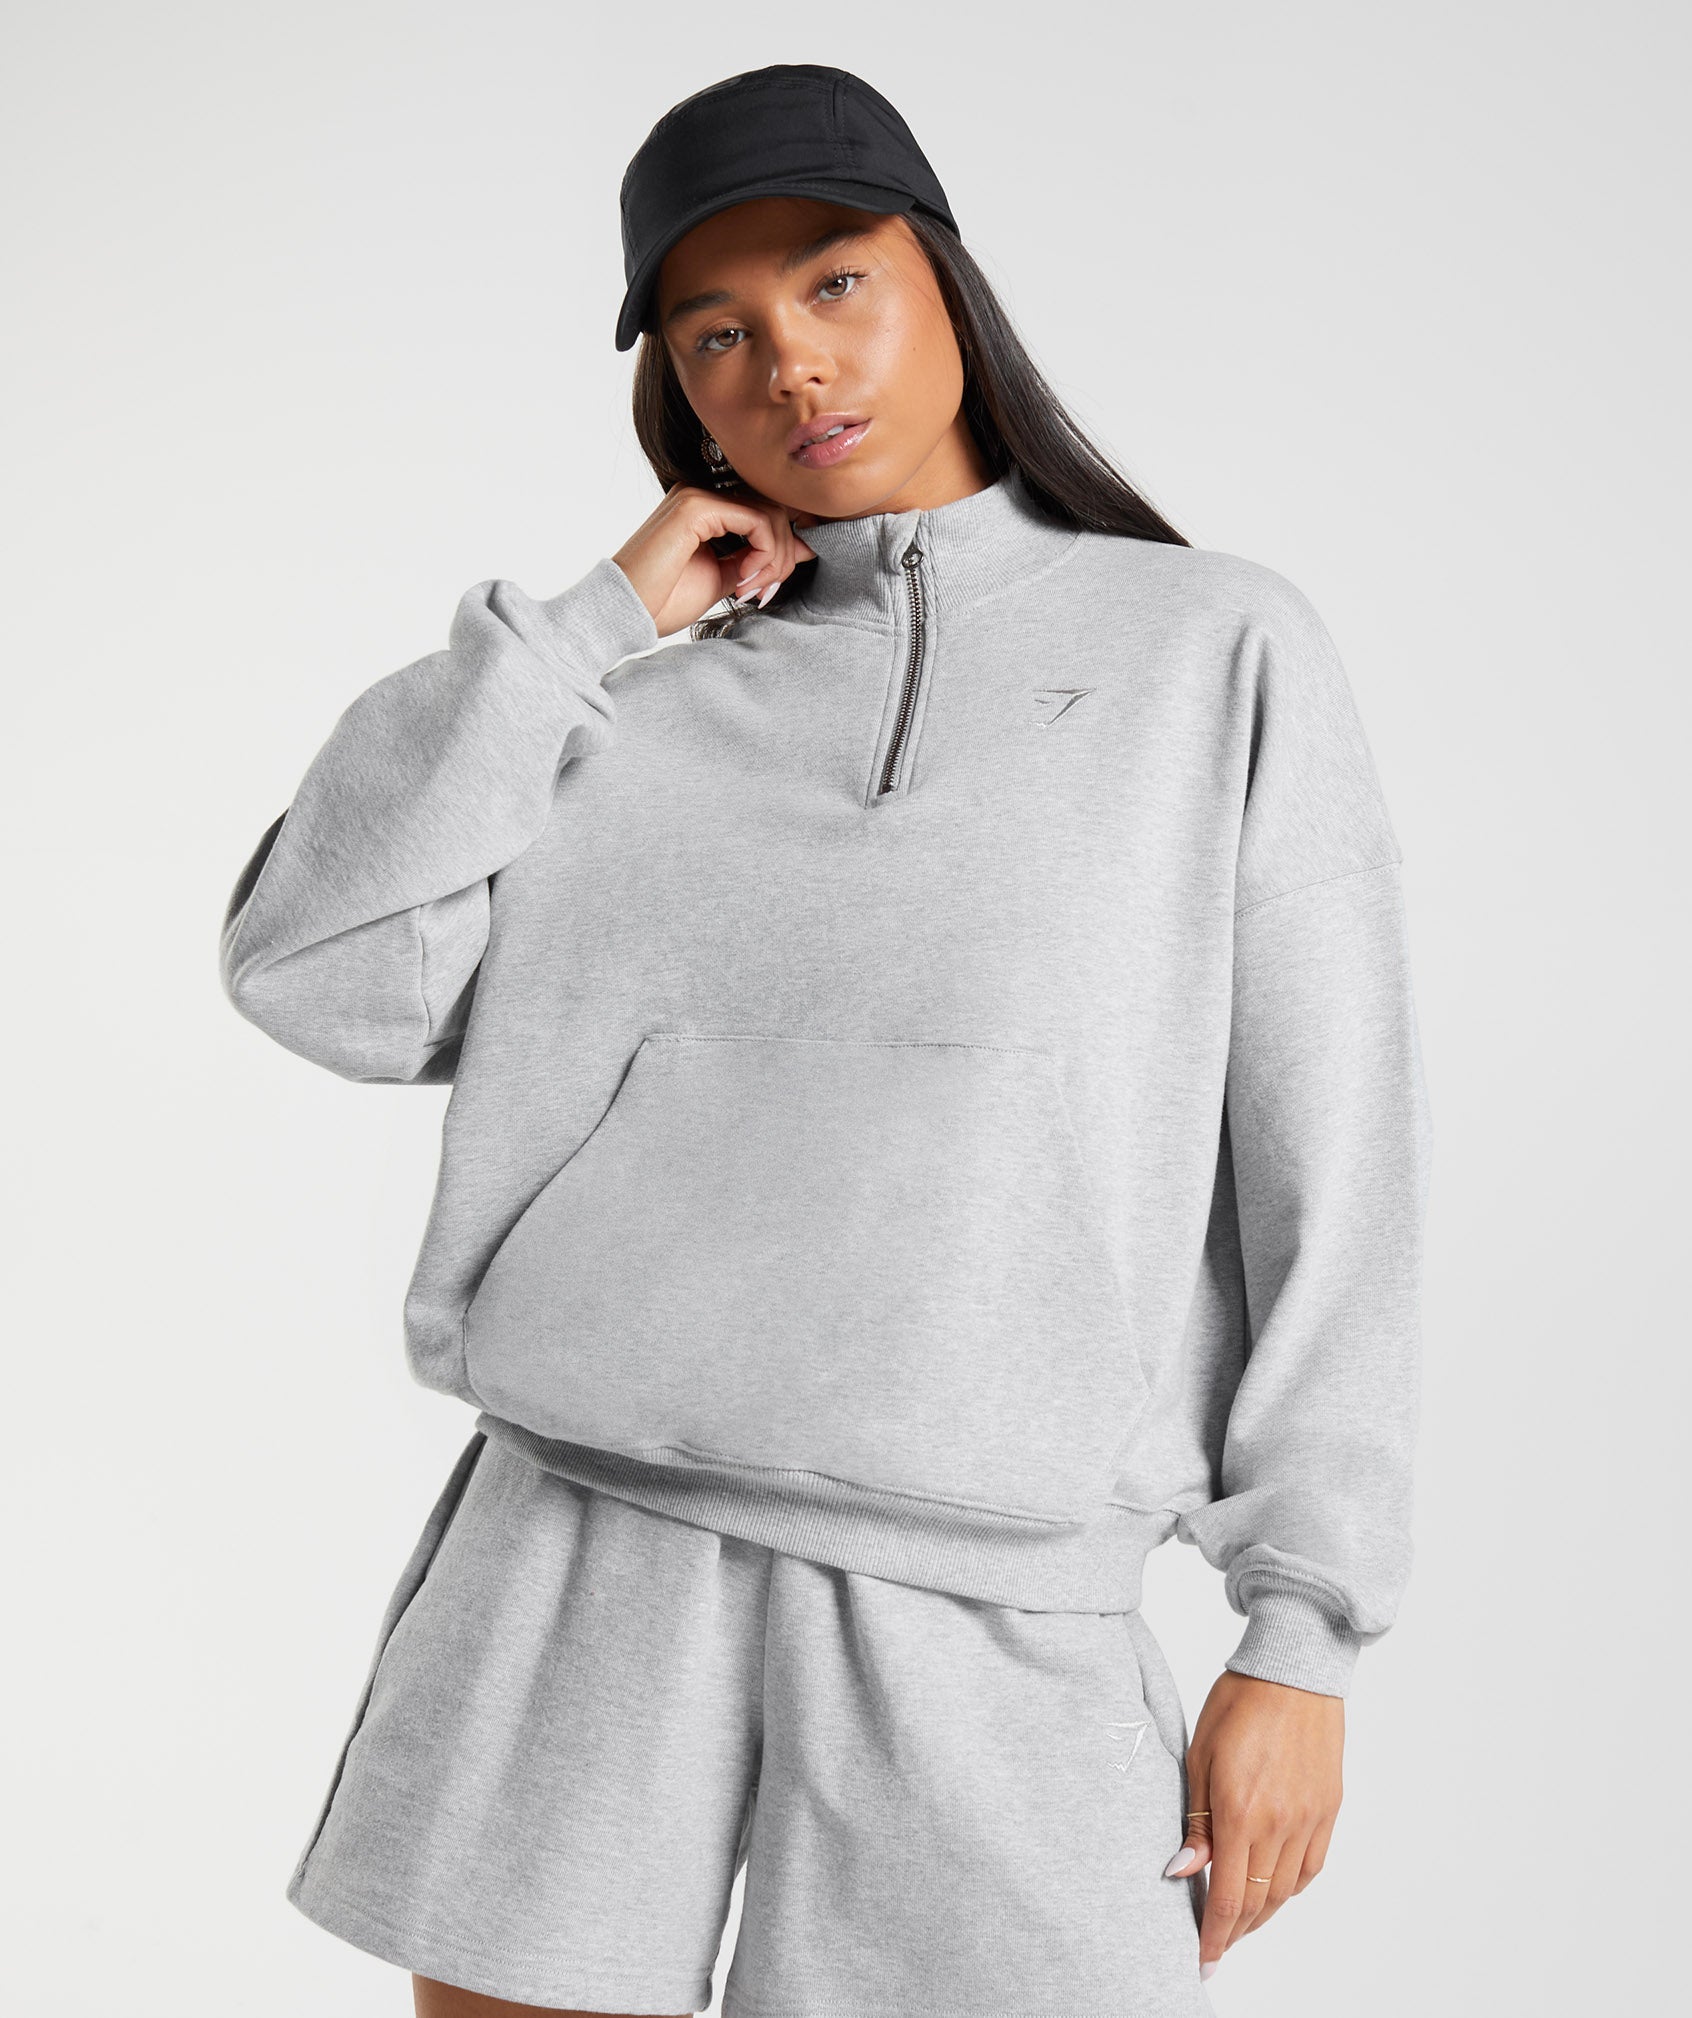 Rest Day Sweats 1/2 Zip Pullover in Light Grey Core Marl - view 5